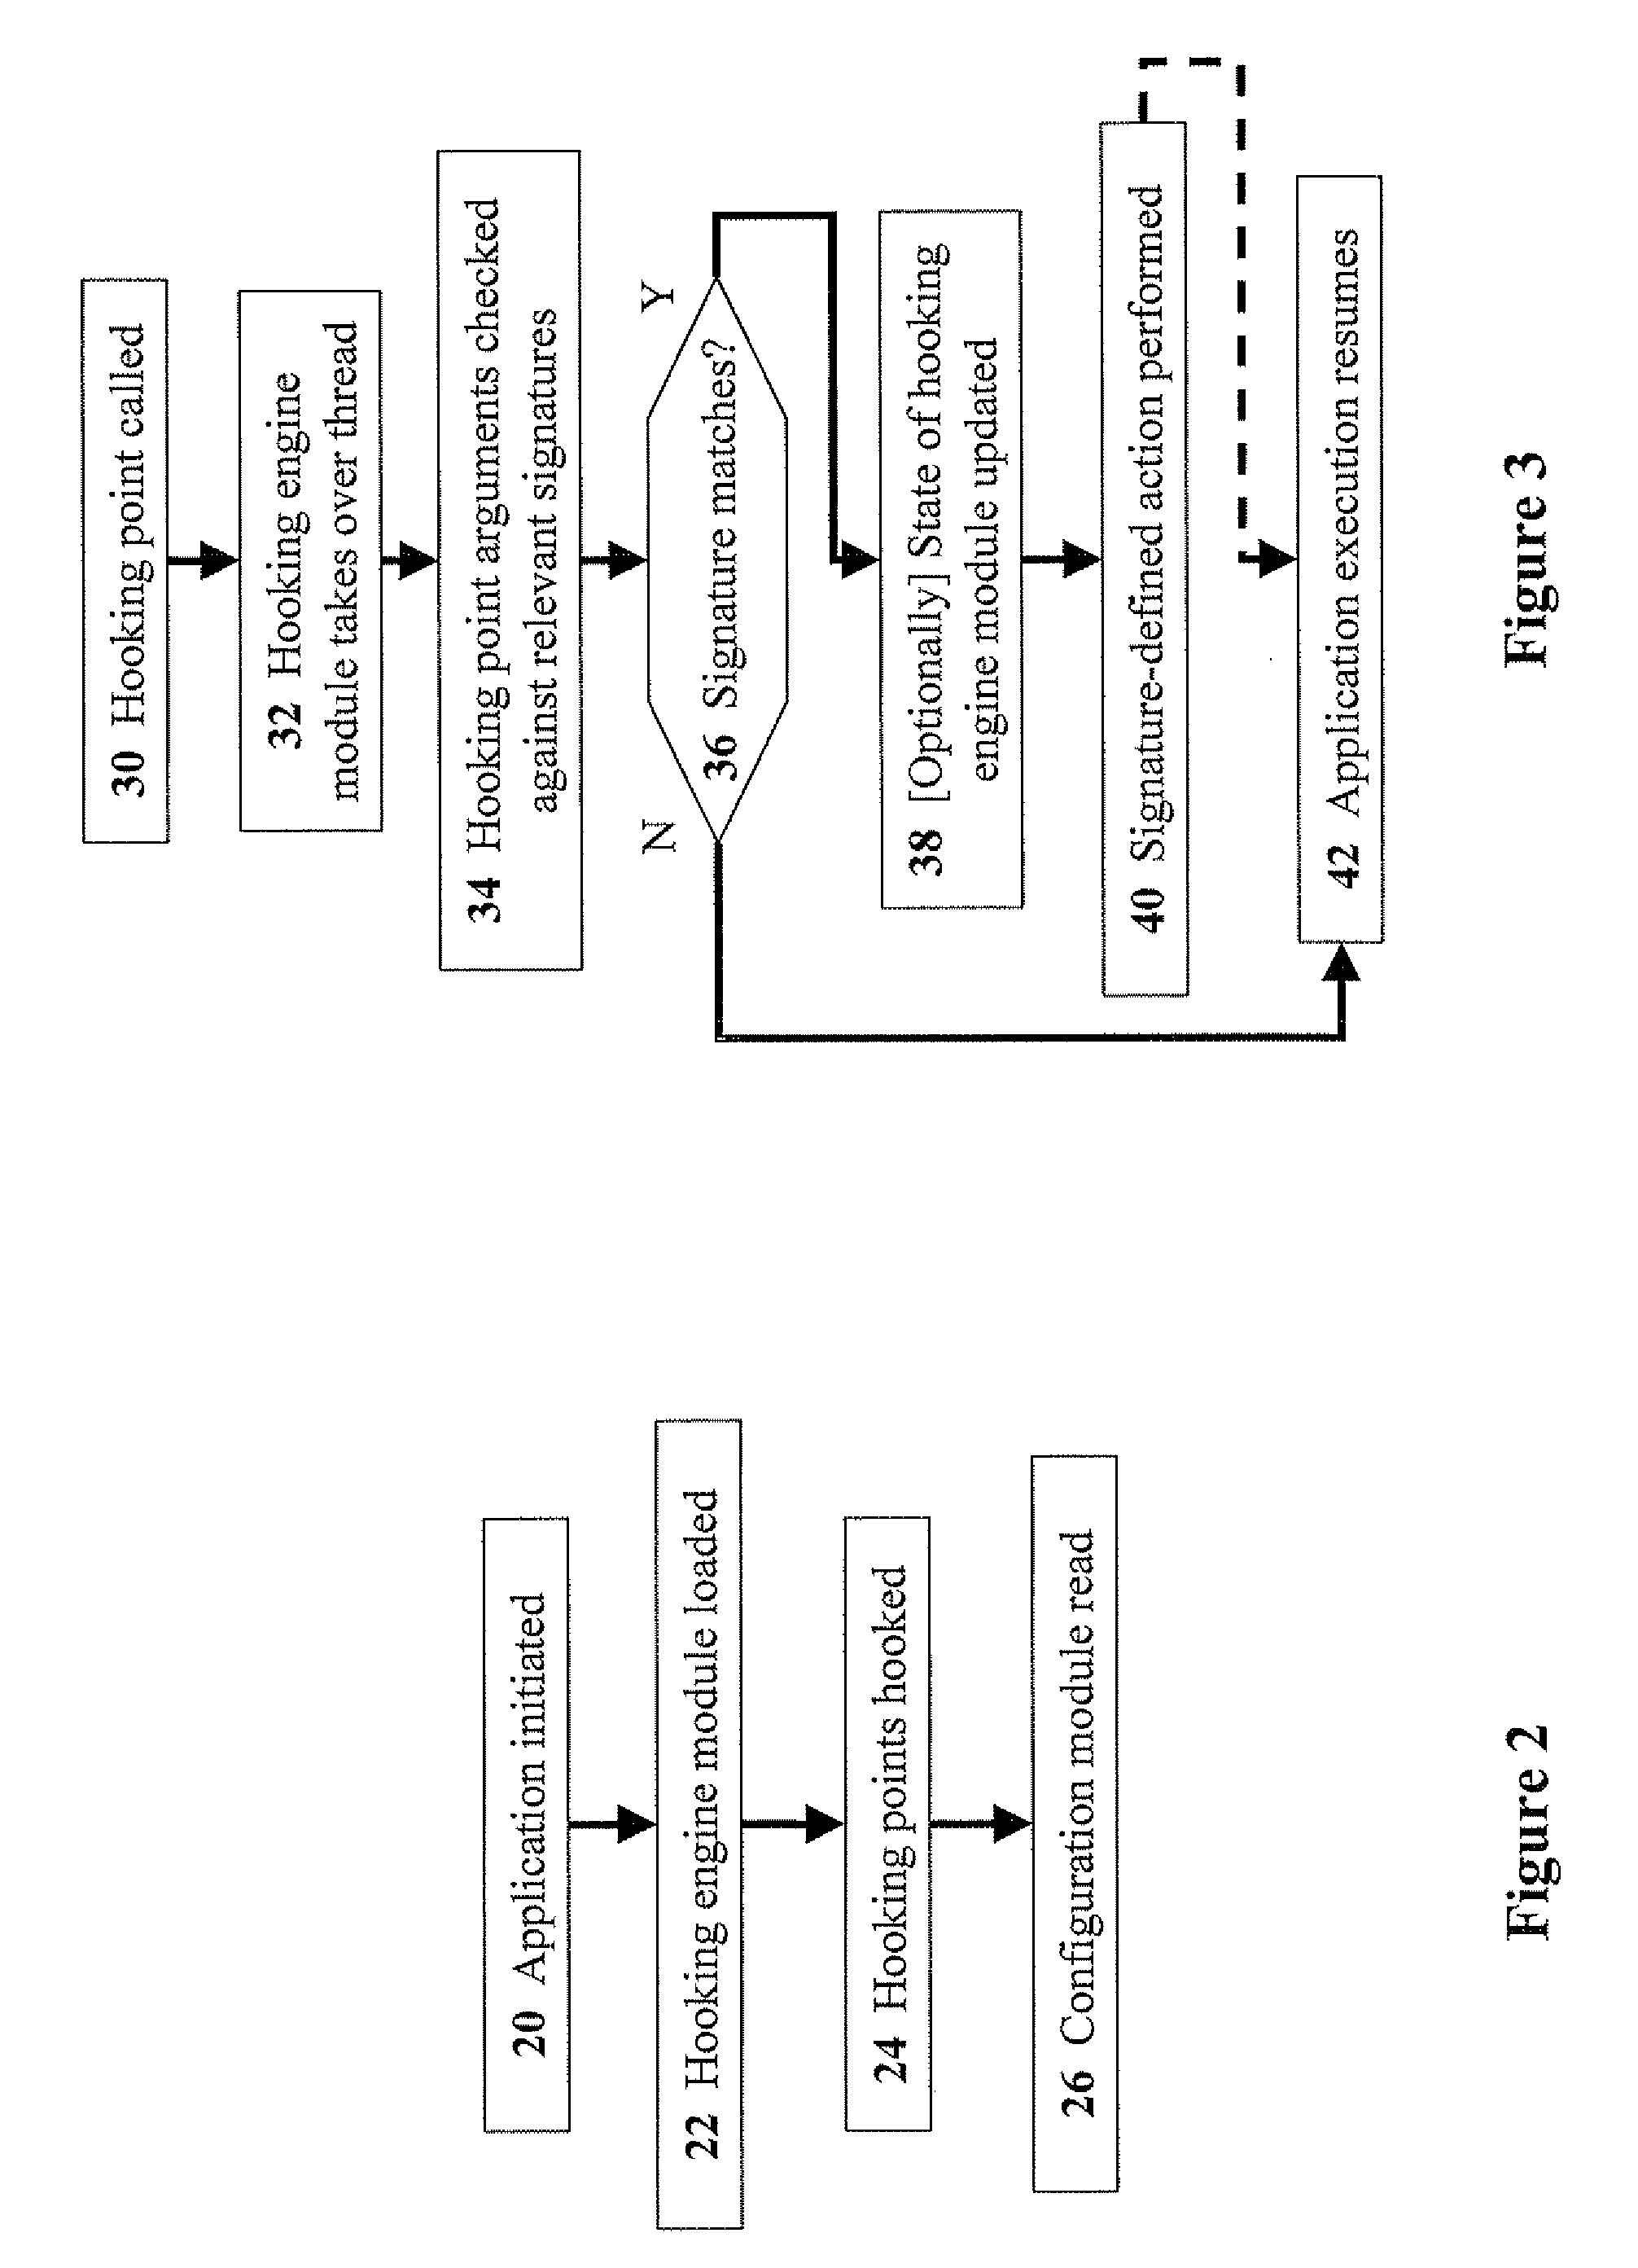 Methods for hooking applications to monitor and prevent execution of security-sensitive operations